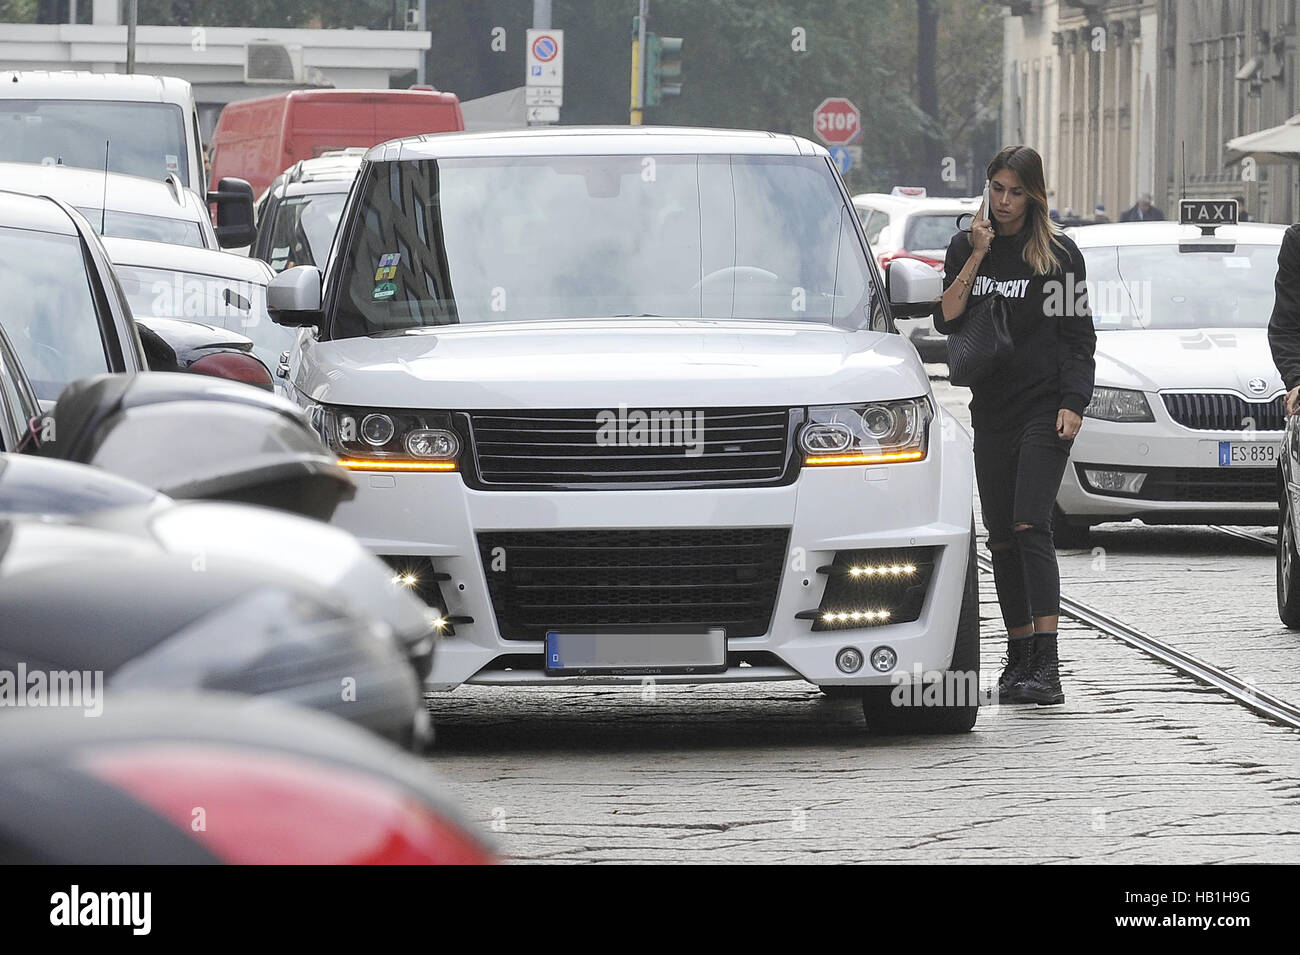 Melissa Satta-Boateng double parks her SUV car as she meets up with ...